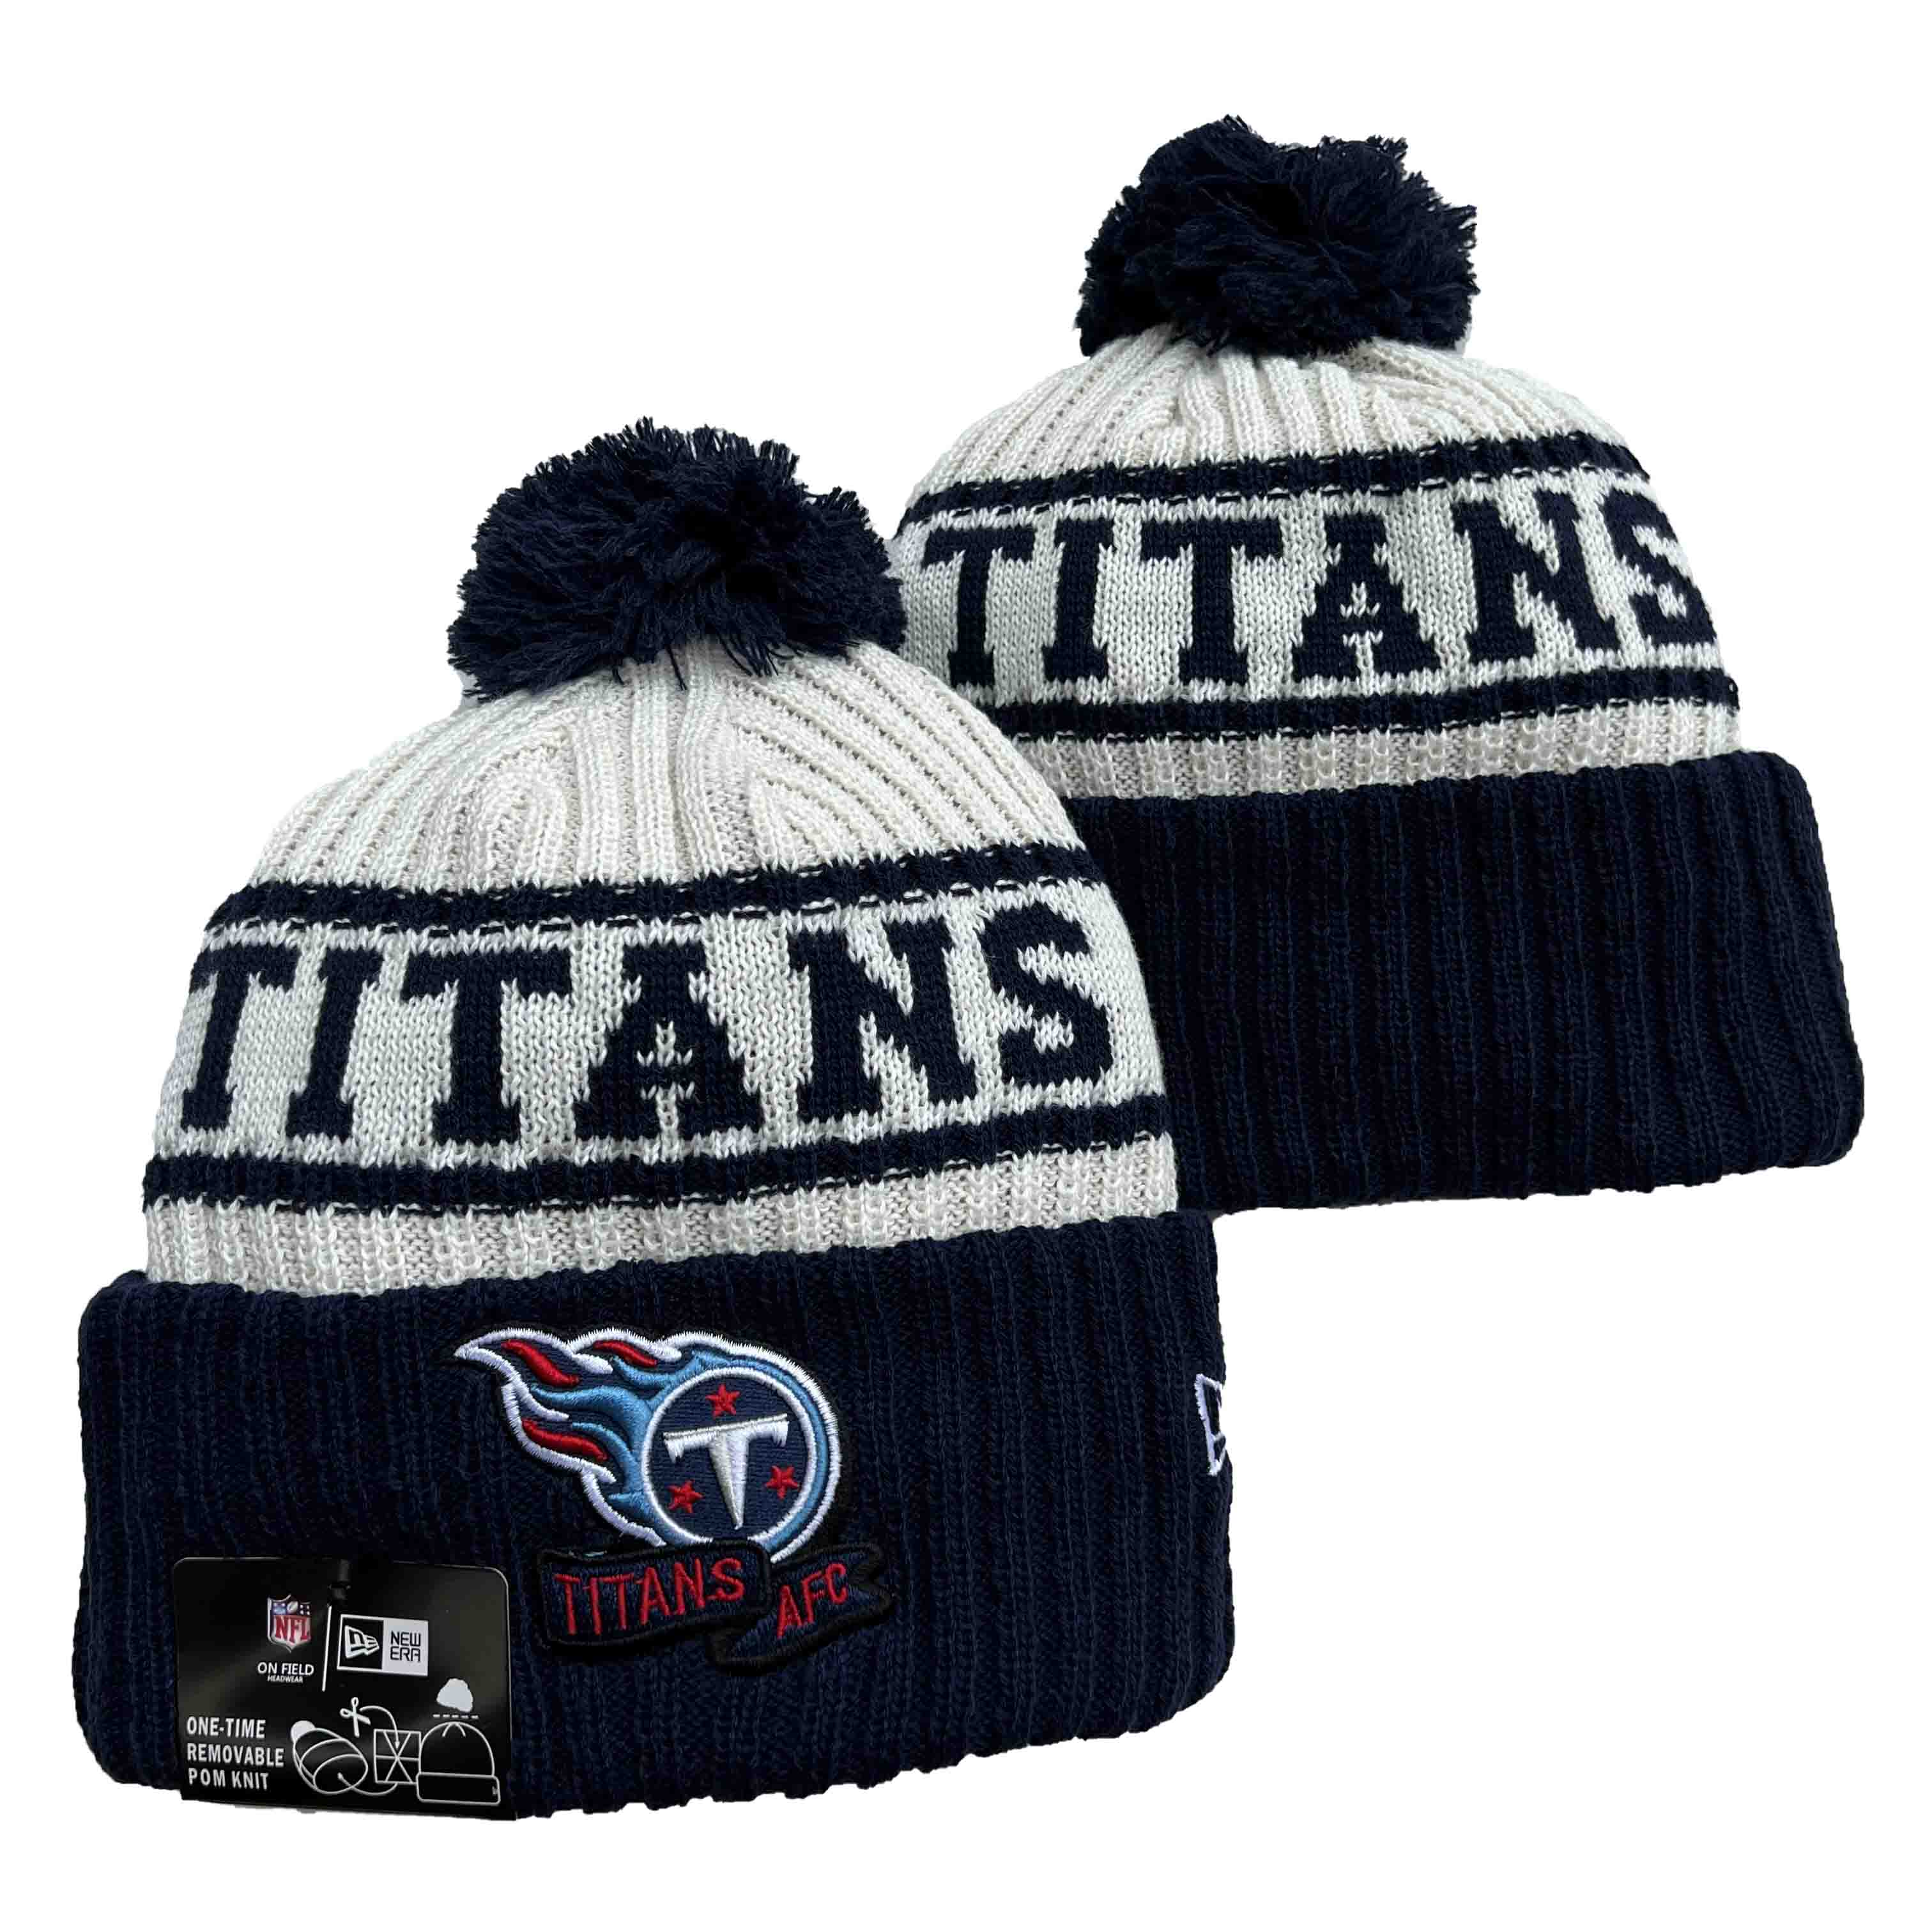 NFL Tennessee Titans Beanies Knit Hats-YD1312